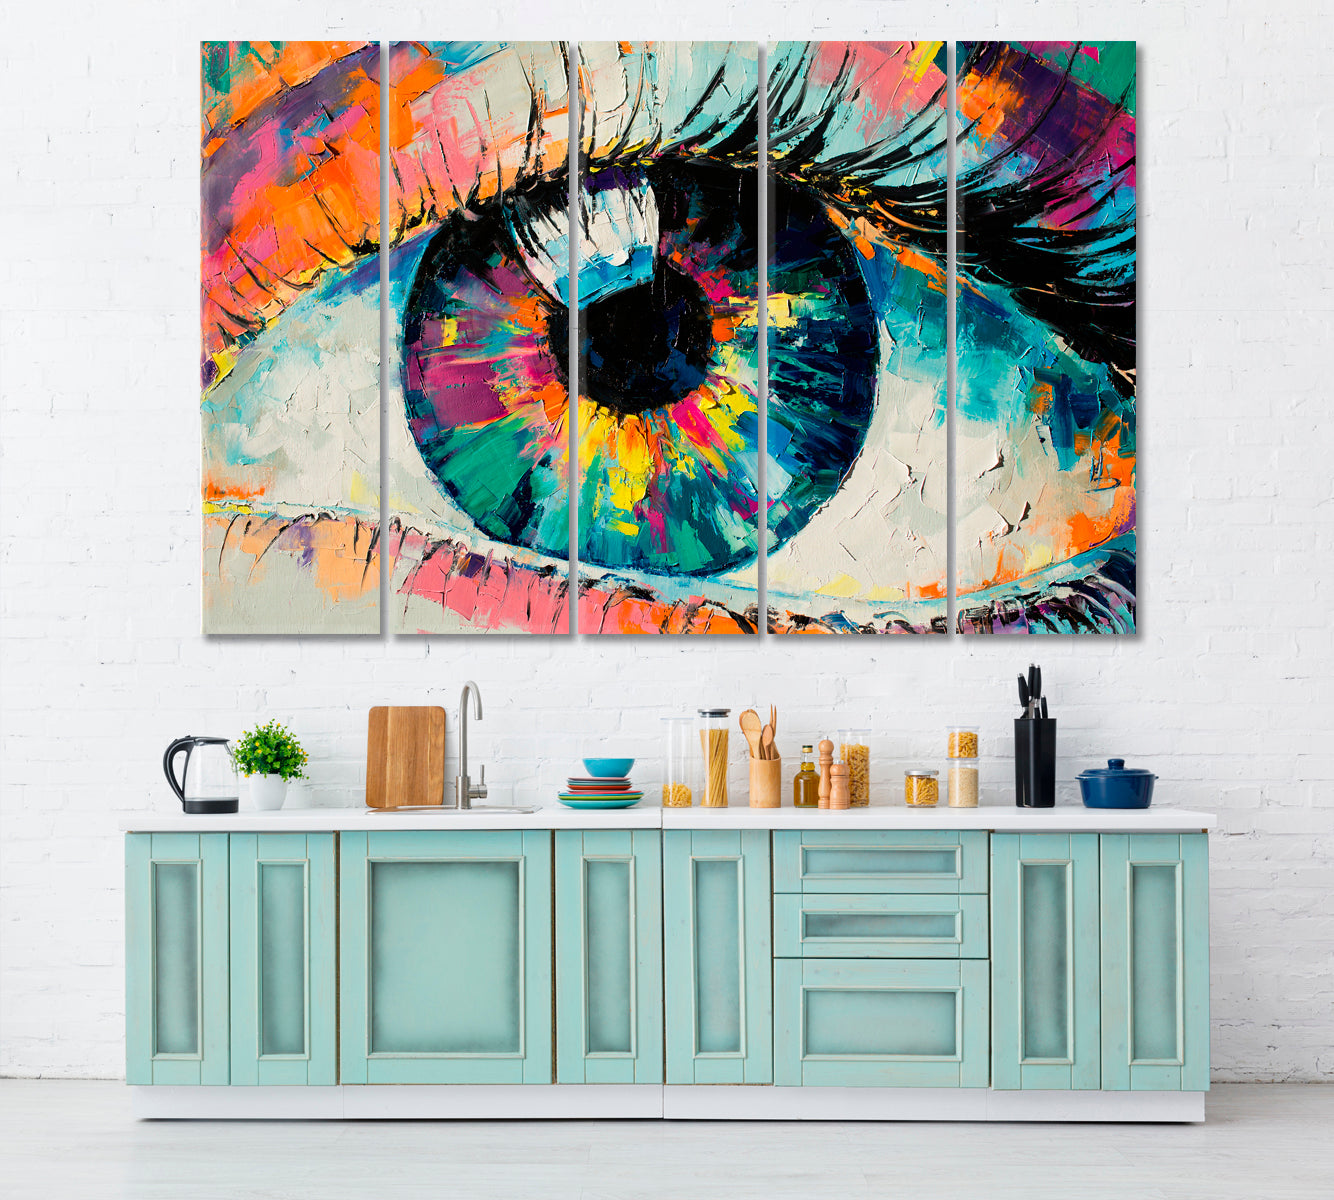 ABSTRACT EYE Colorful Contemporaty Fine Art Artesty 5 panels 36" x 24" 